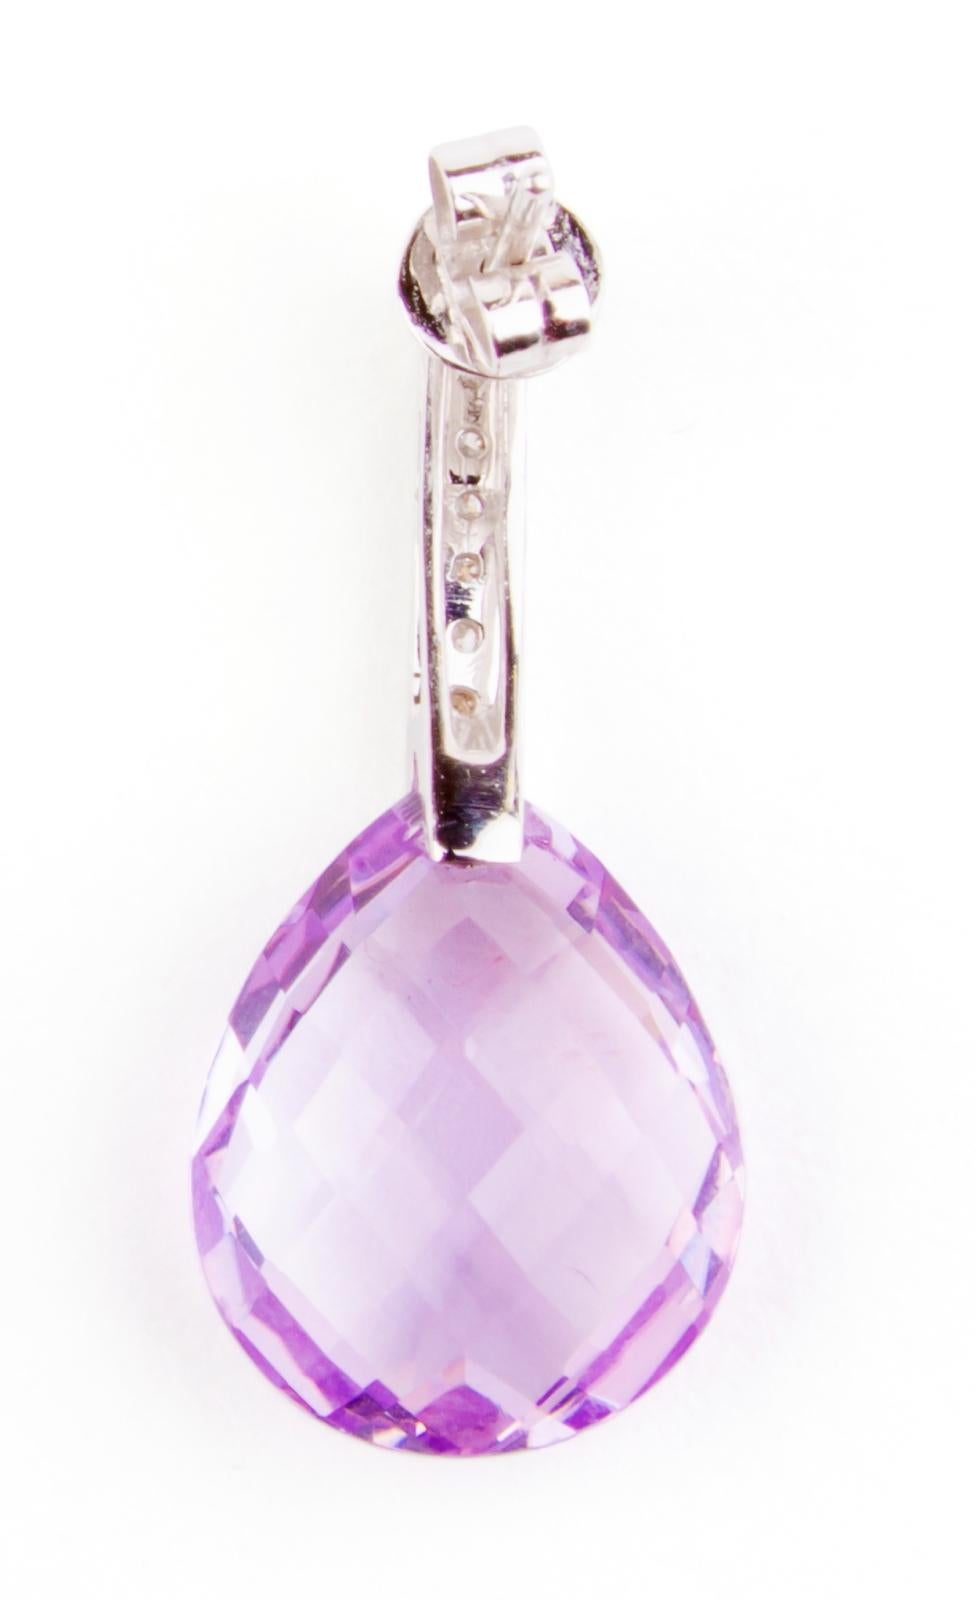 18 Karat White Gold Diamond and Amethyst Earrings In Excellent Condition For Sale In Dorset, GB